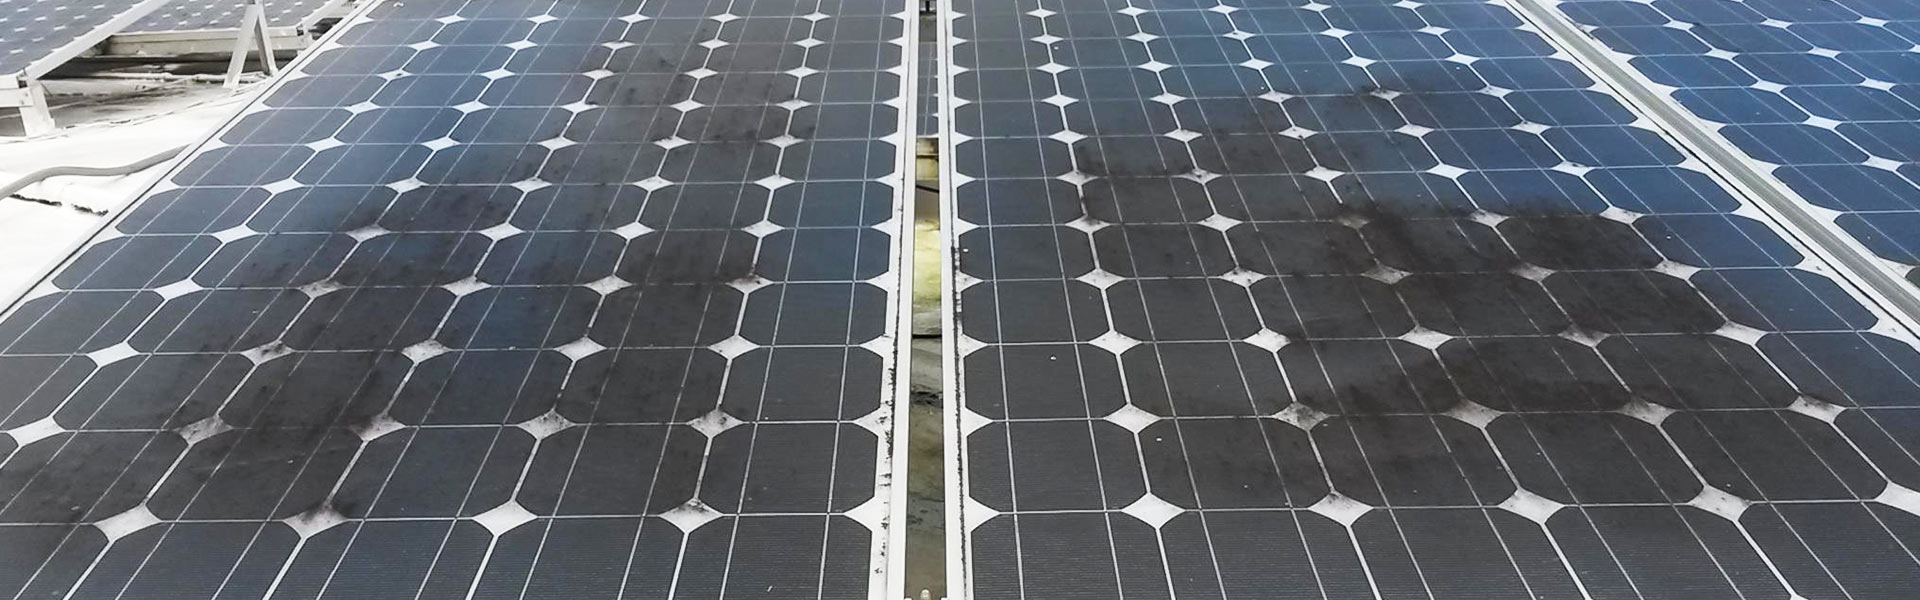 glass-science-solar-panels-unprotected